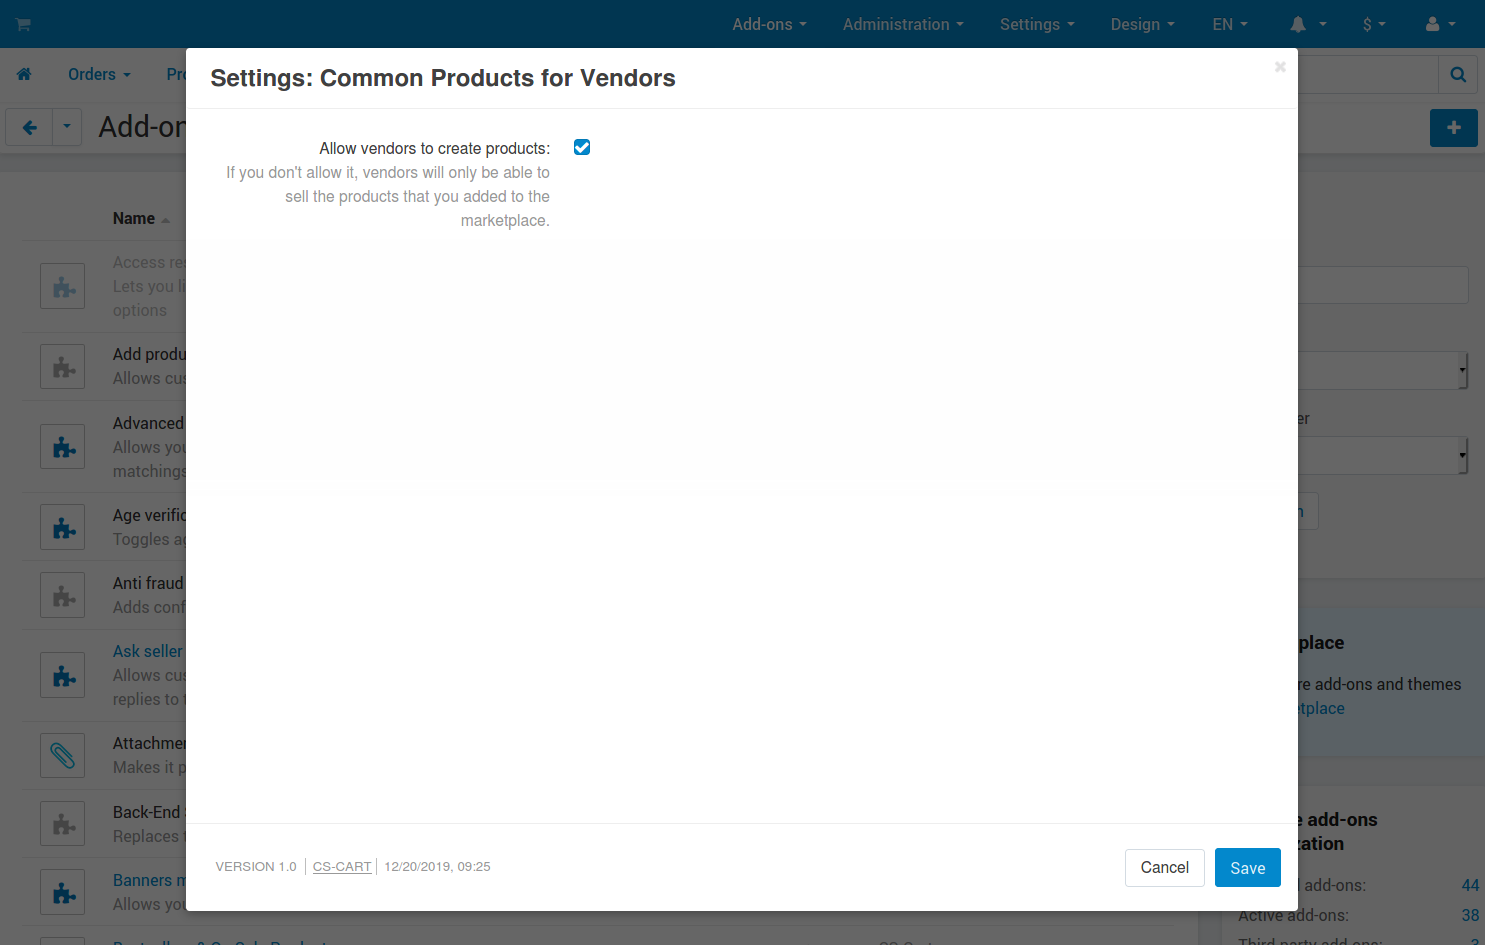 The settings of the "Common Products for Vendors" add-on.